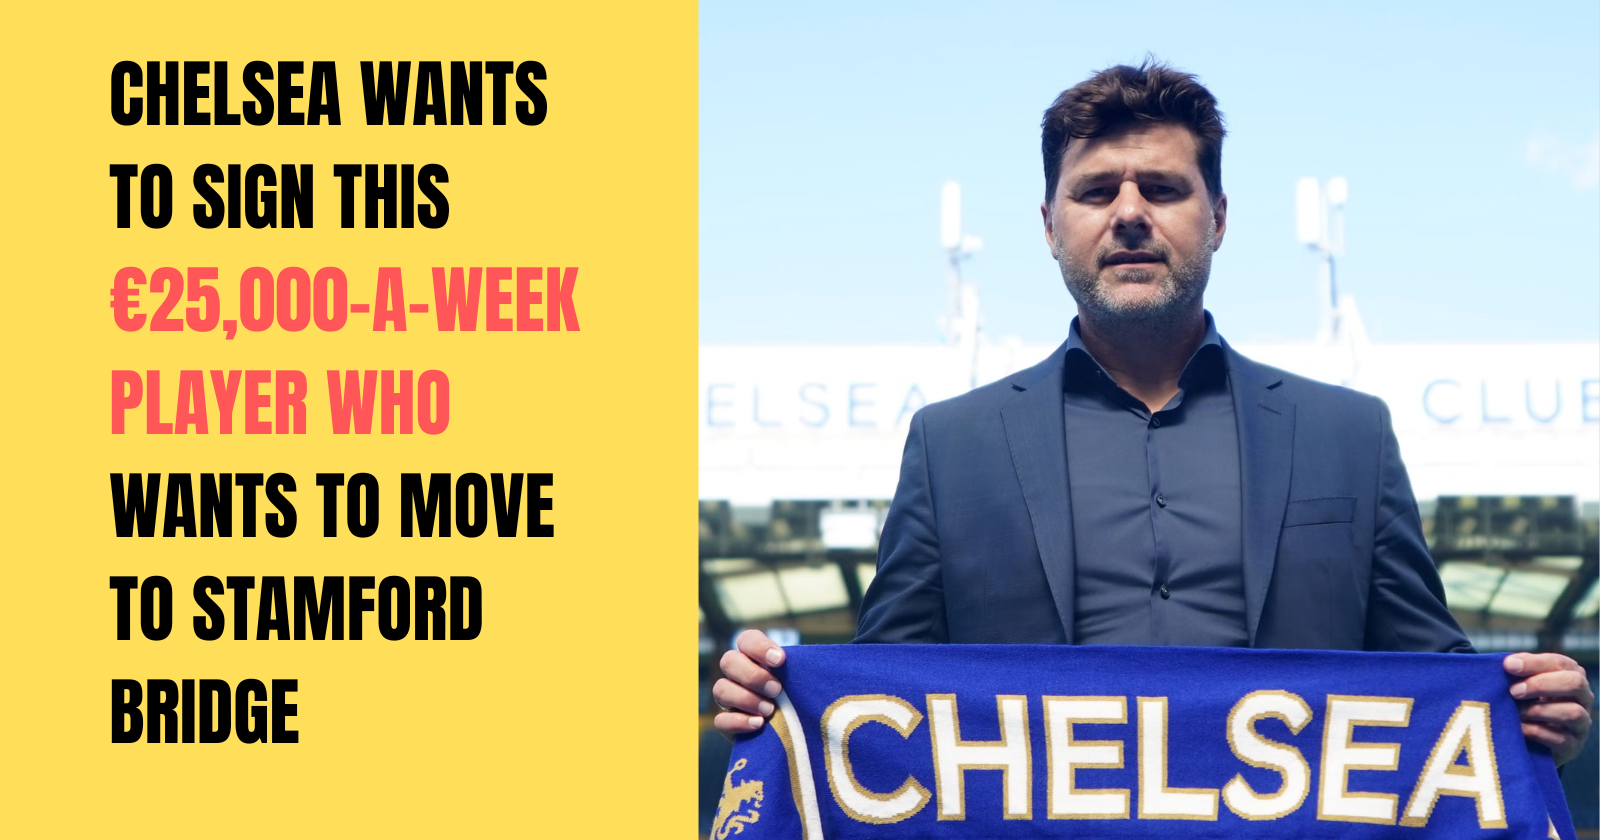 Chelsea Wants To Sign This ￡25,000-A-Week Player Who Wants To Move To Stamford Bridge